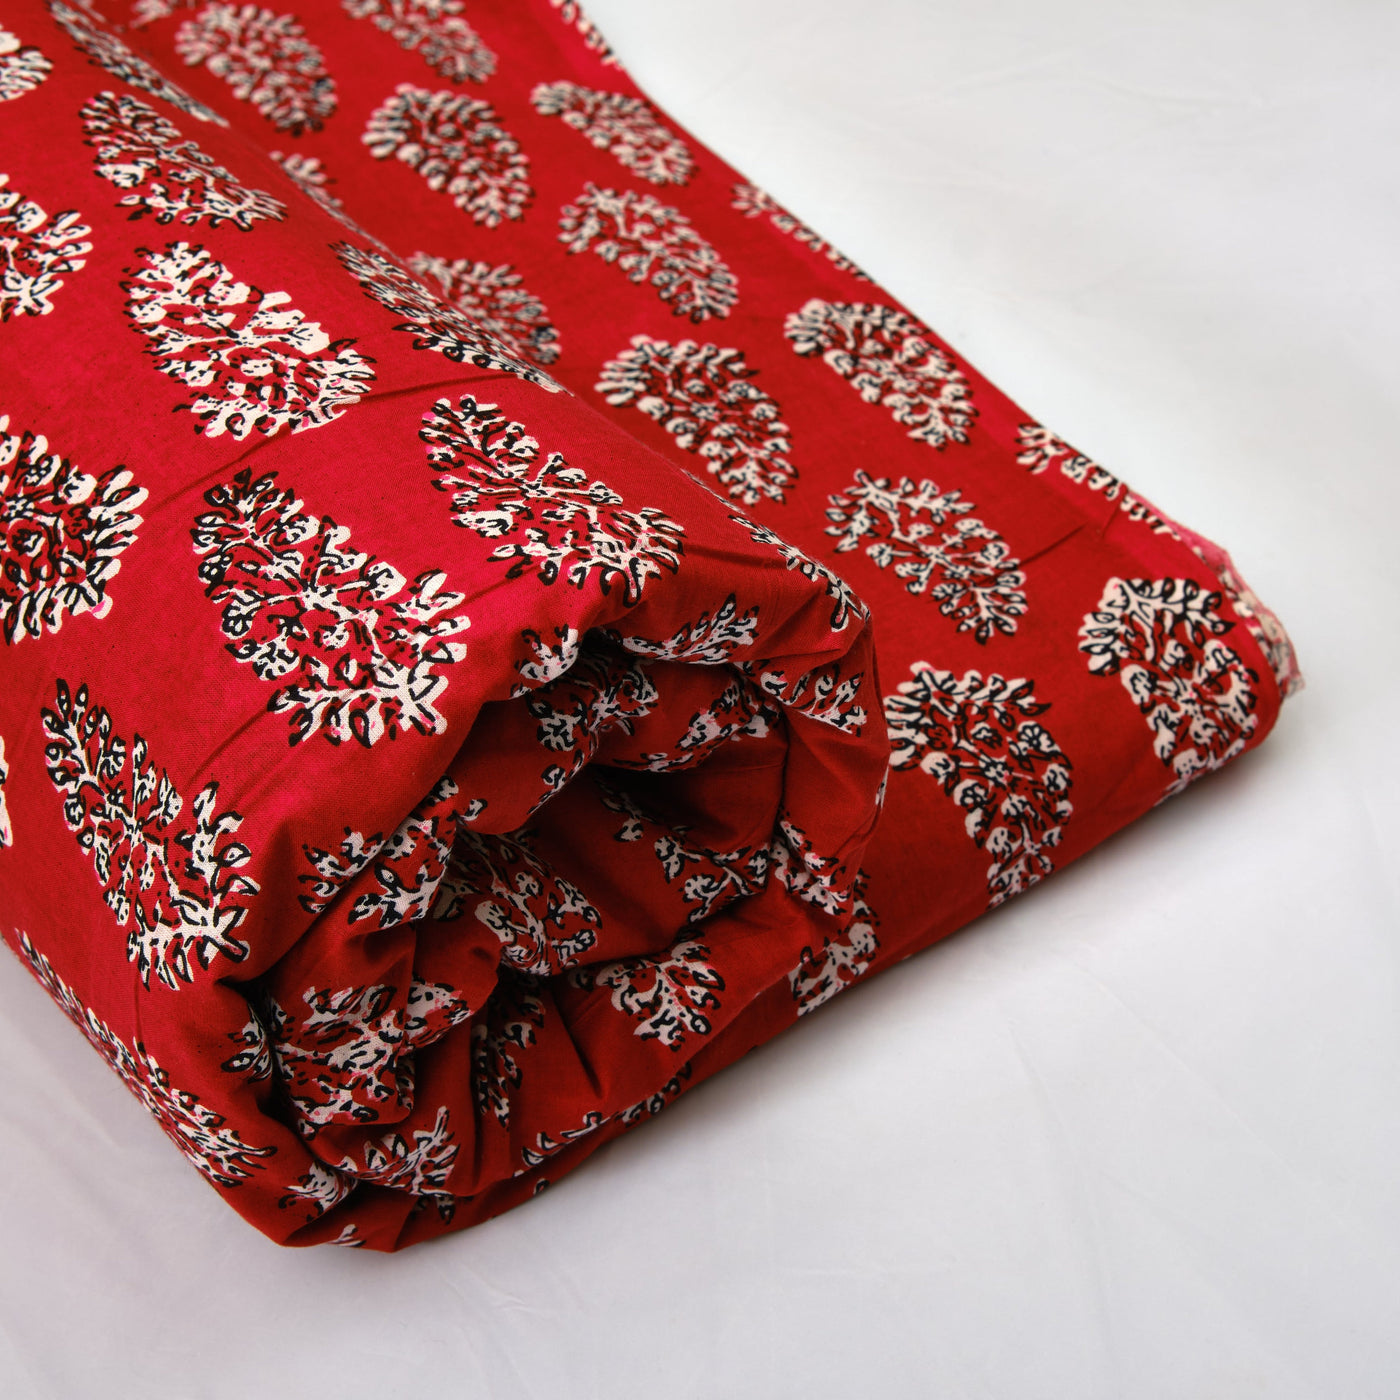 Fabricrush Light Blood Red, Black and White Indian Printed 100 % Pure Cotton Cloth, Fabric by the Yard, Women's Clothing Curtains Pillows Cushions Bags